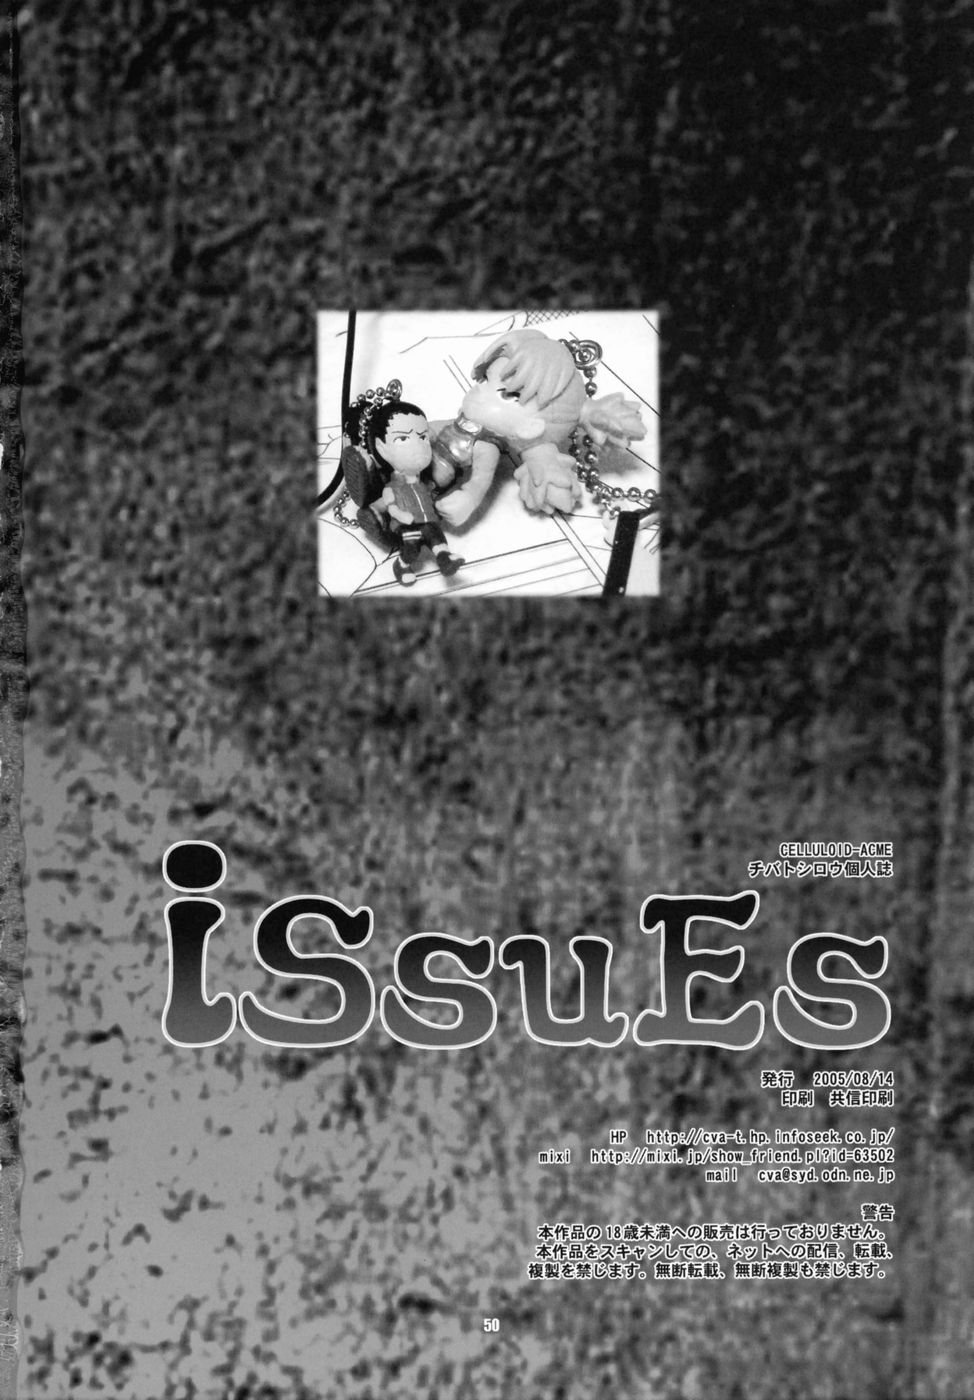 (C68) [Celluloid-Acme] Issues (Naruto) [Celluloid-Acme] Issues (ナルト)